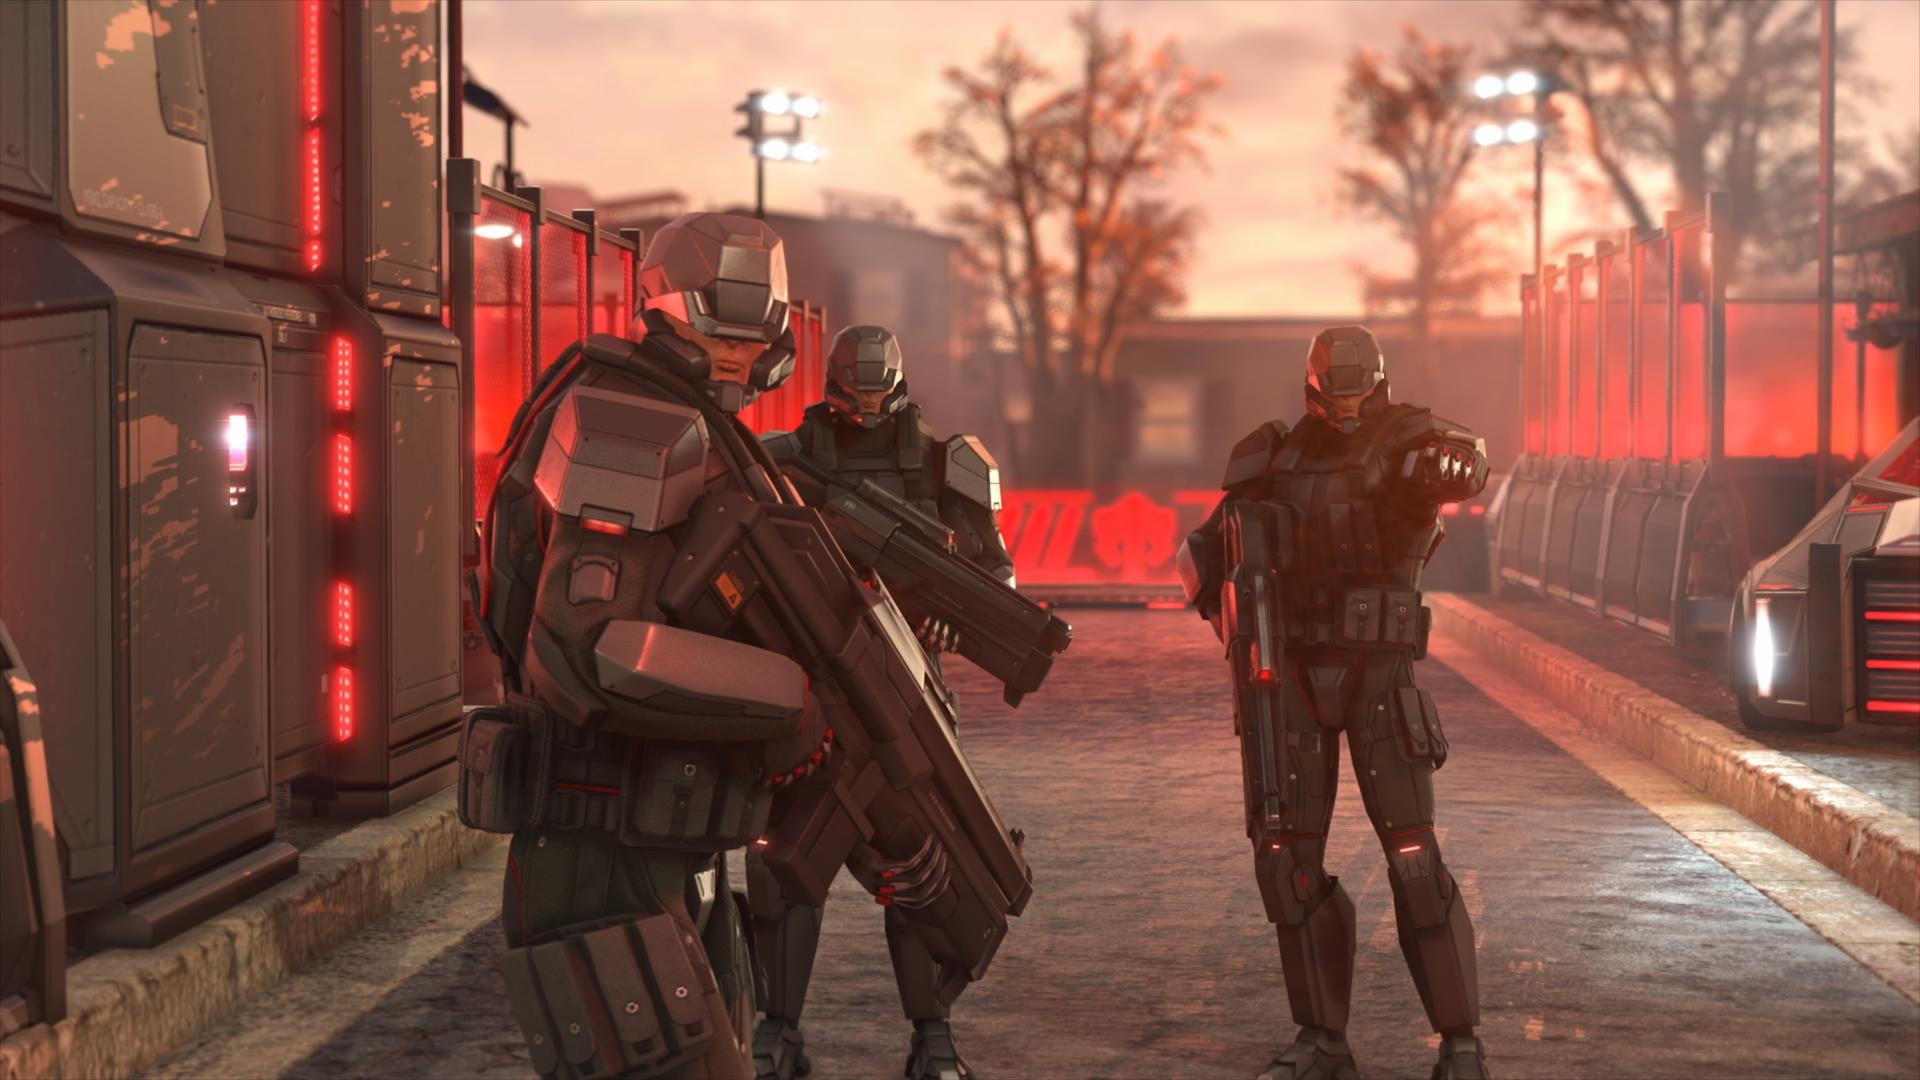 XCOM 2 is free on the Epic Games Store, but the deal ends next